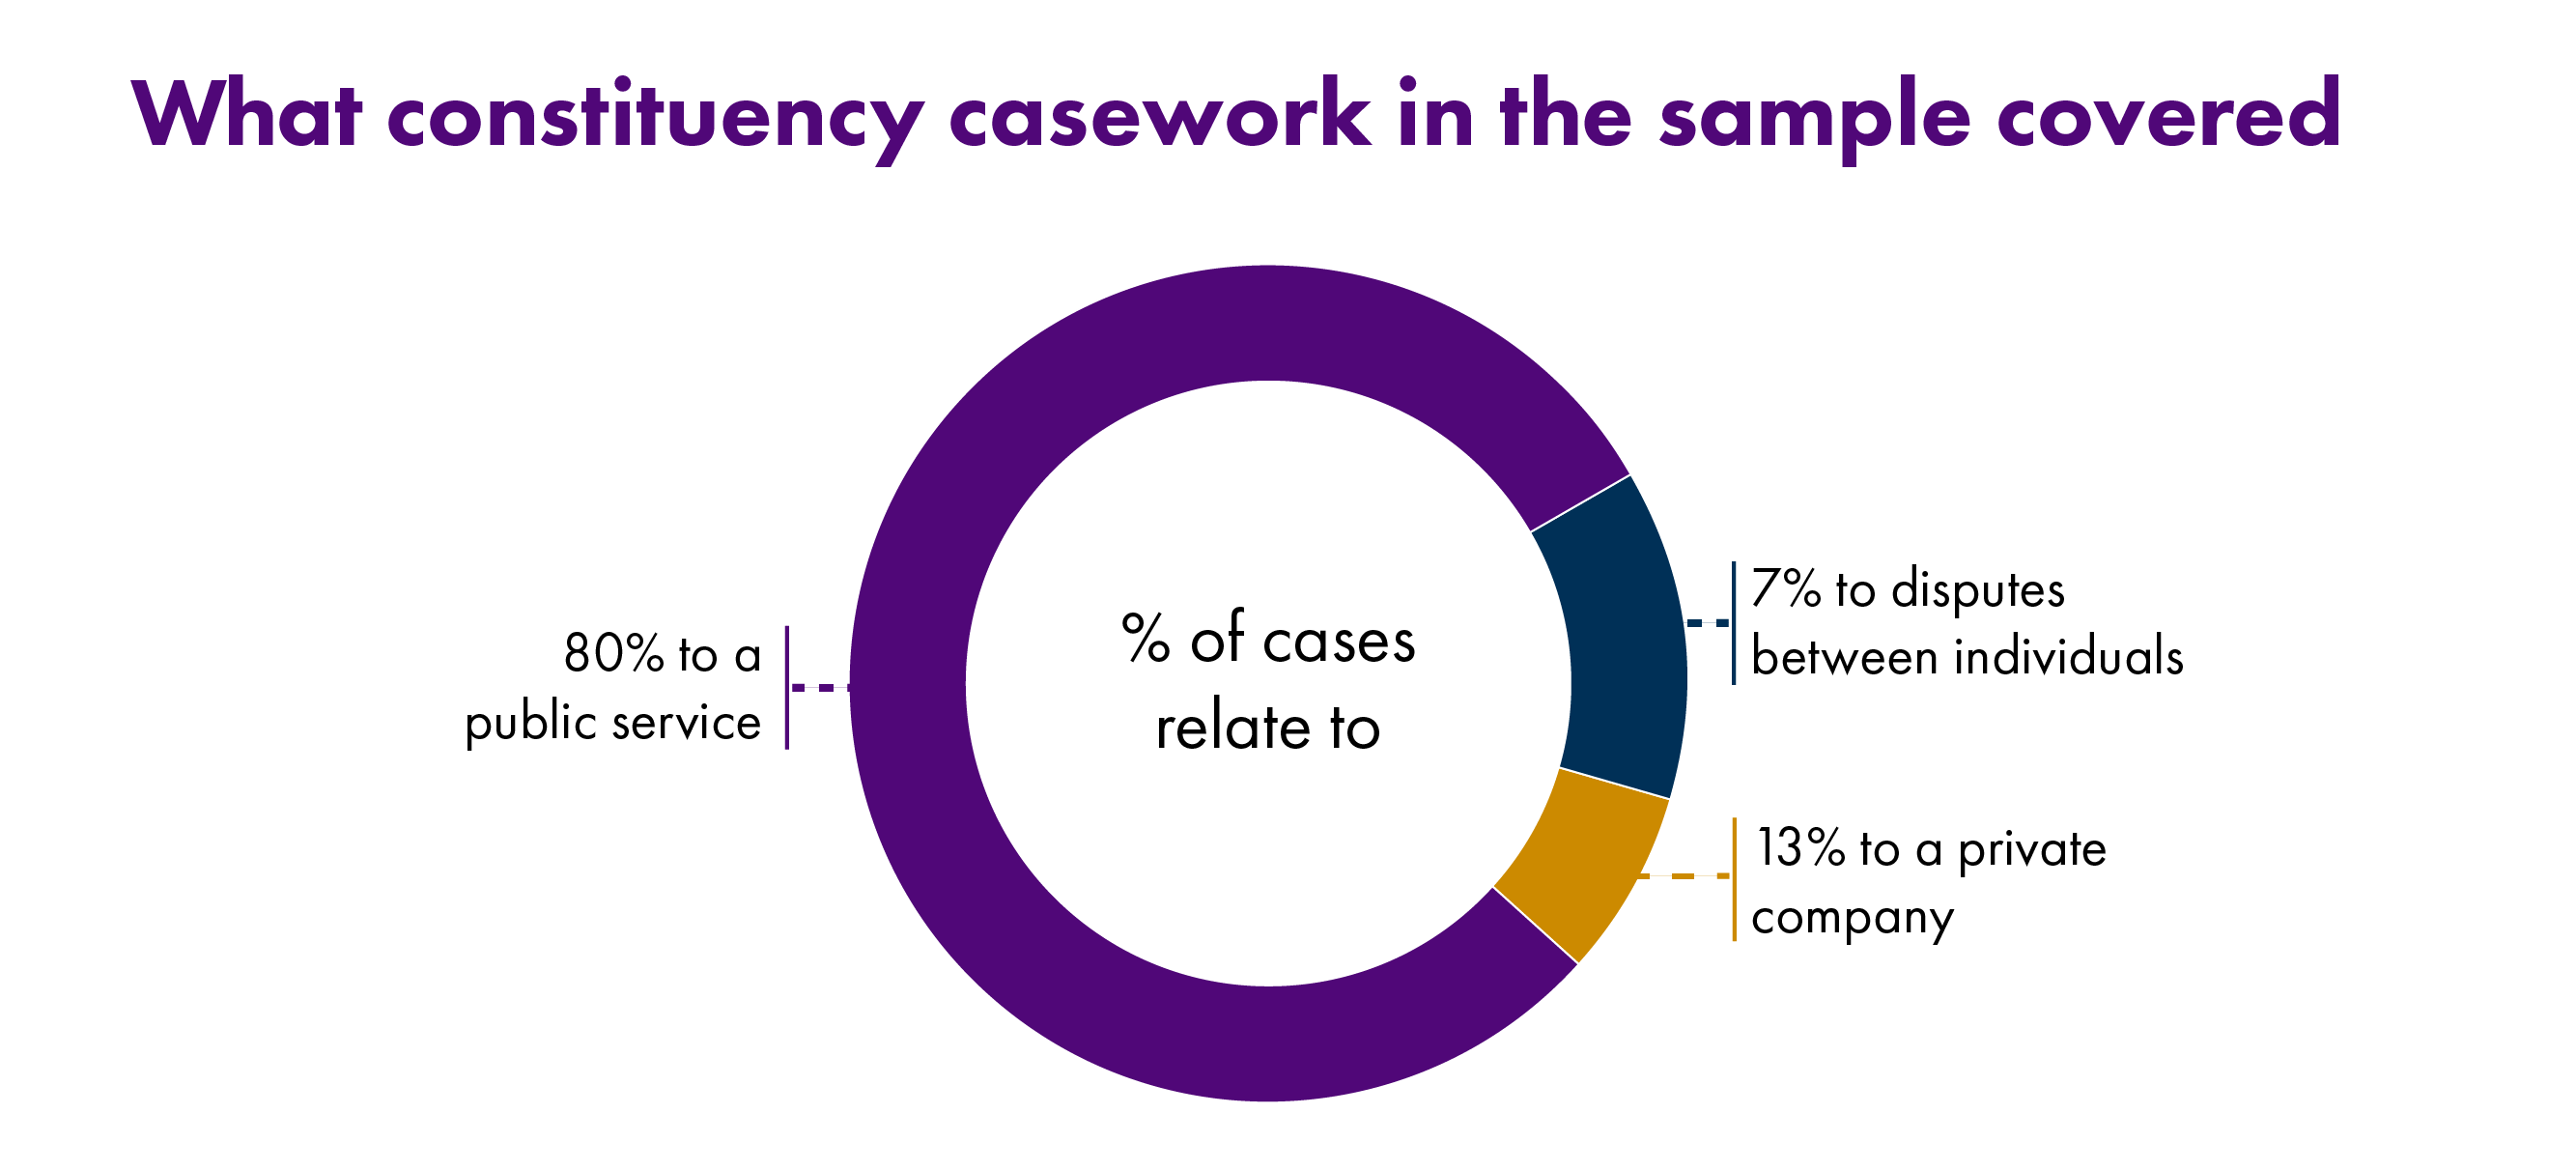 Infographic showing the origins of casework cases, with 80% relating to a public service, 13% to a private company and 7% to disputes between individuals.